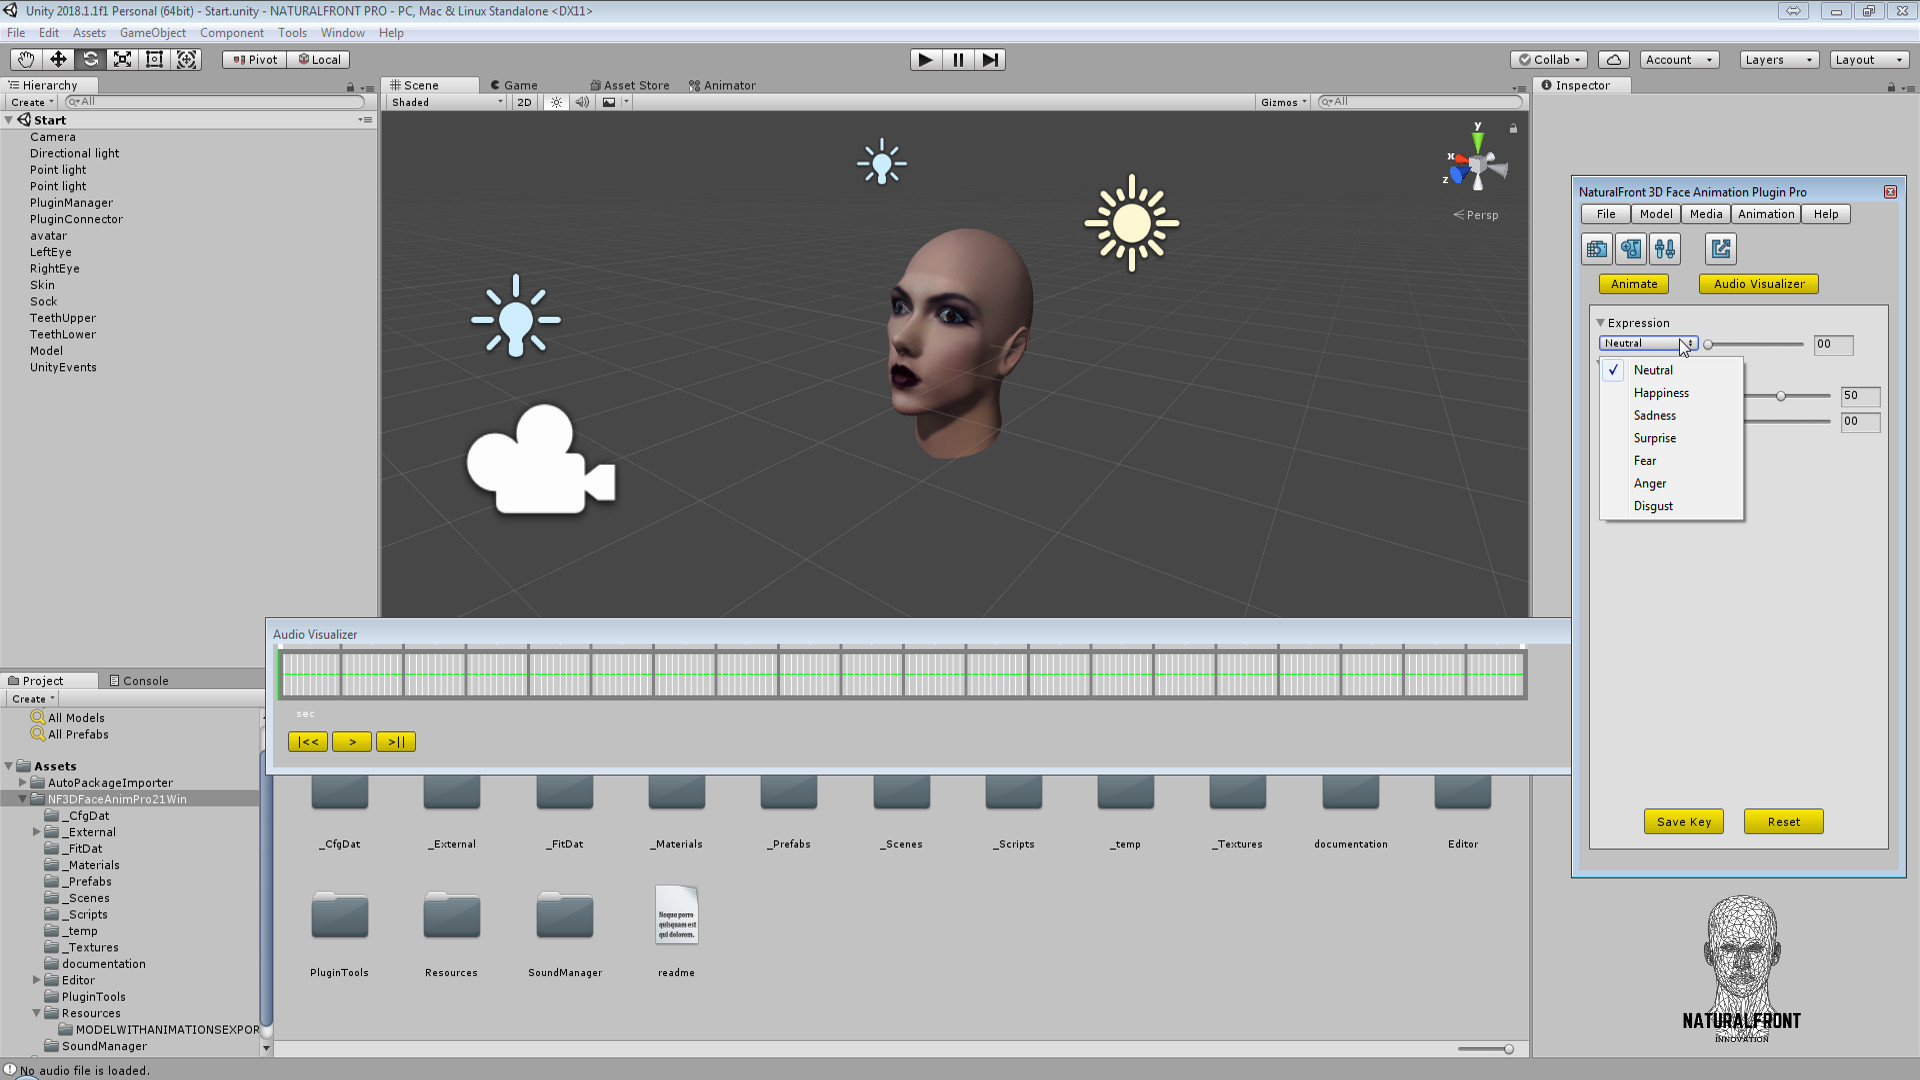 NaturalFront 3D Face Animation Unity Plugin Pro on Steam